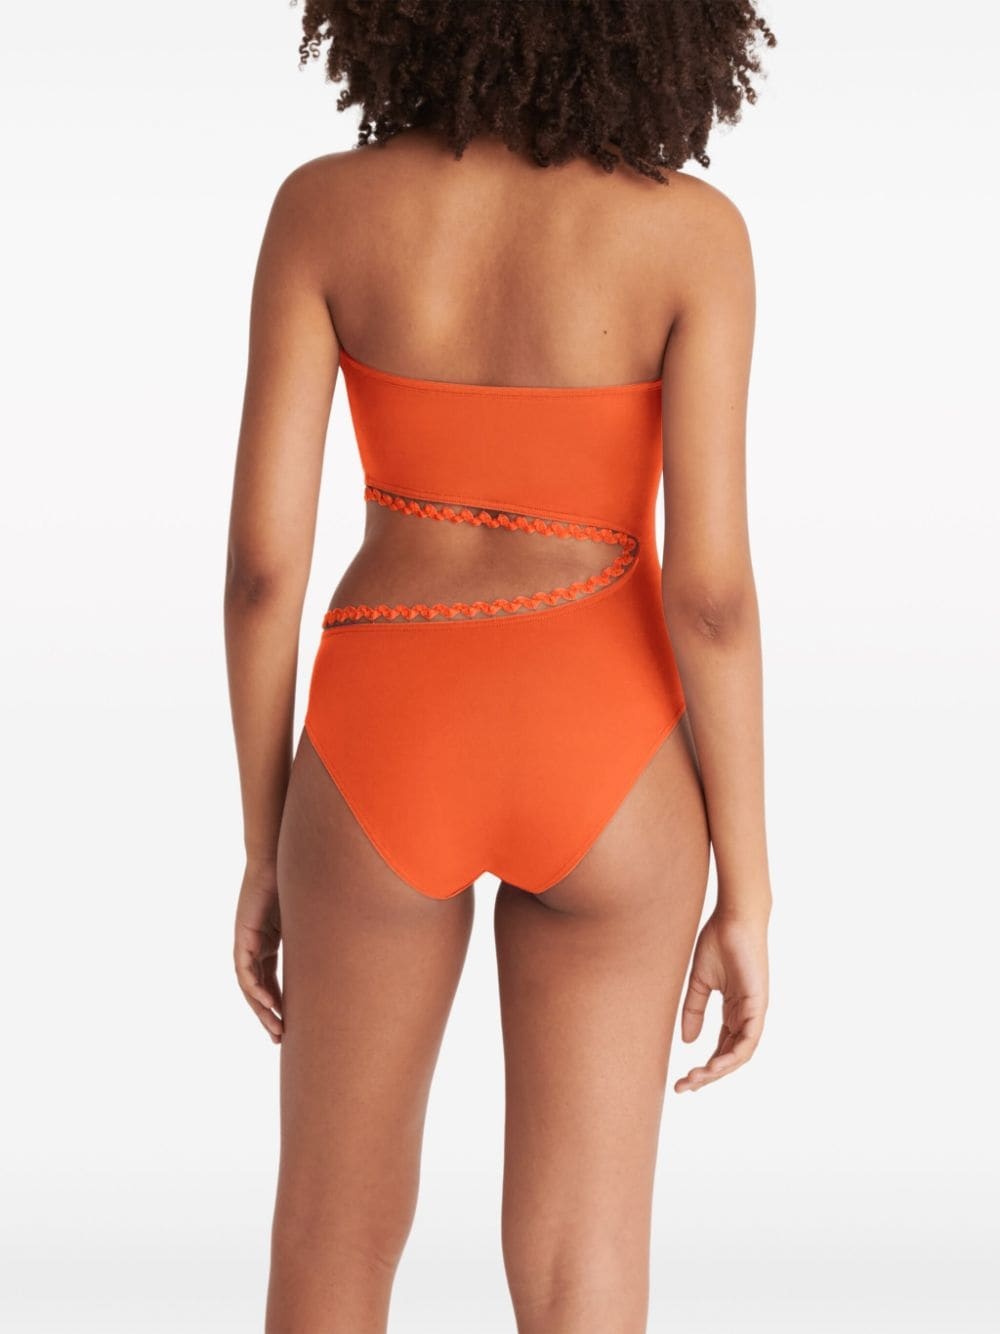 Dancing one-piece strapless swimsuit - 5